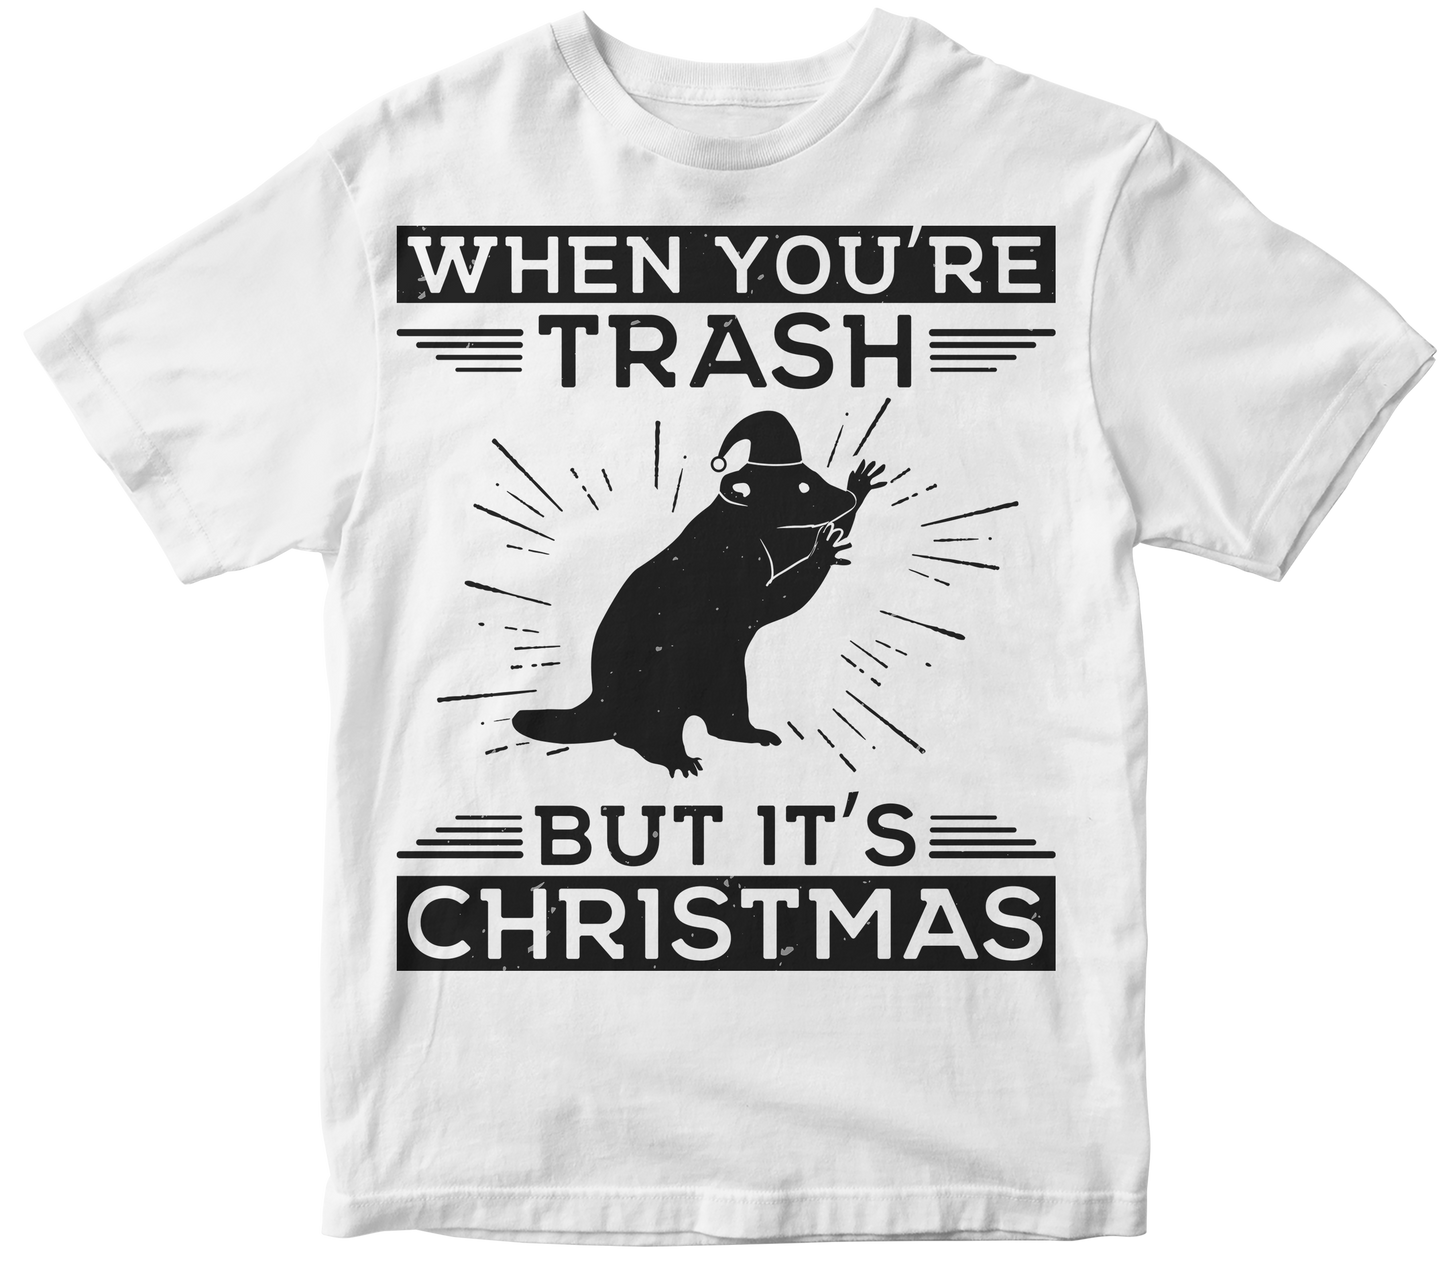 When youre trash but its christmas